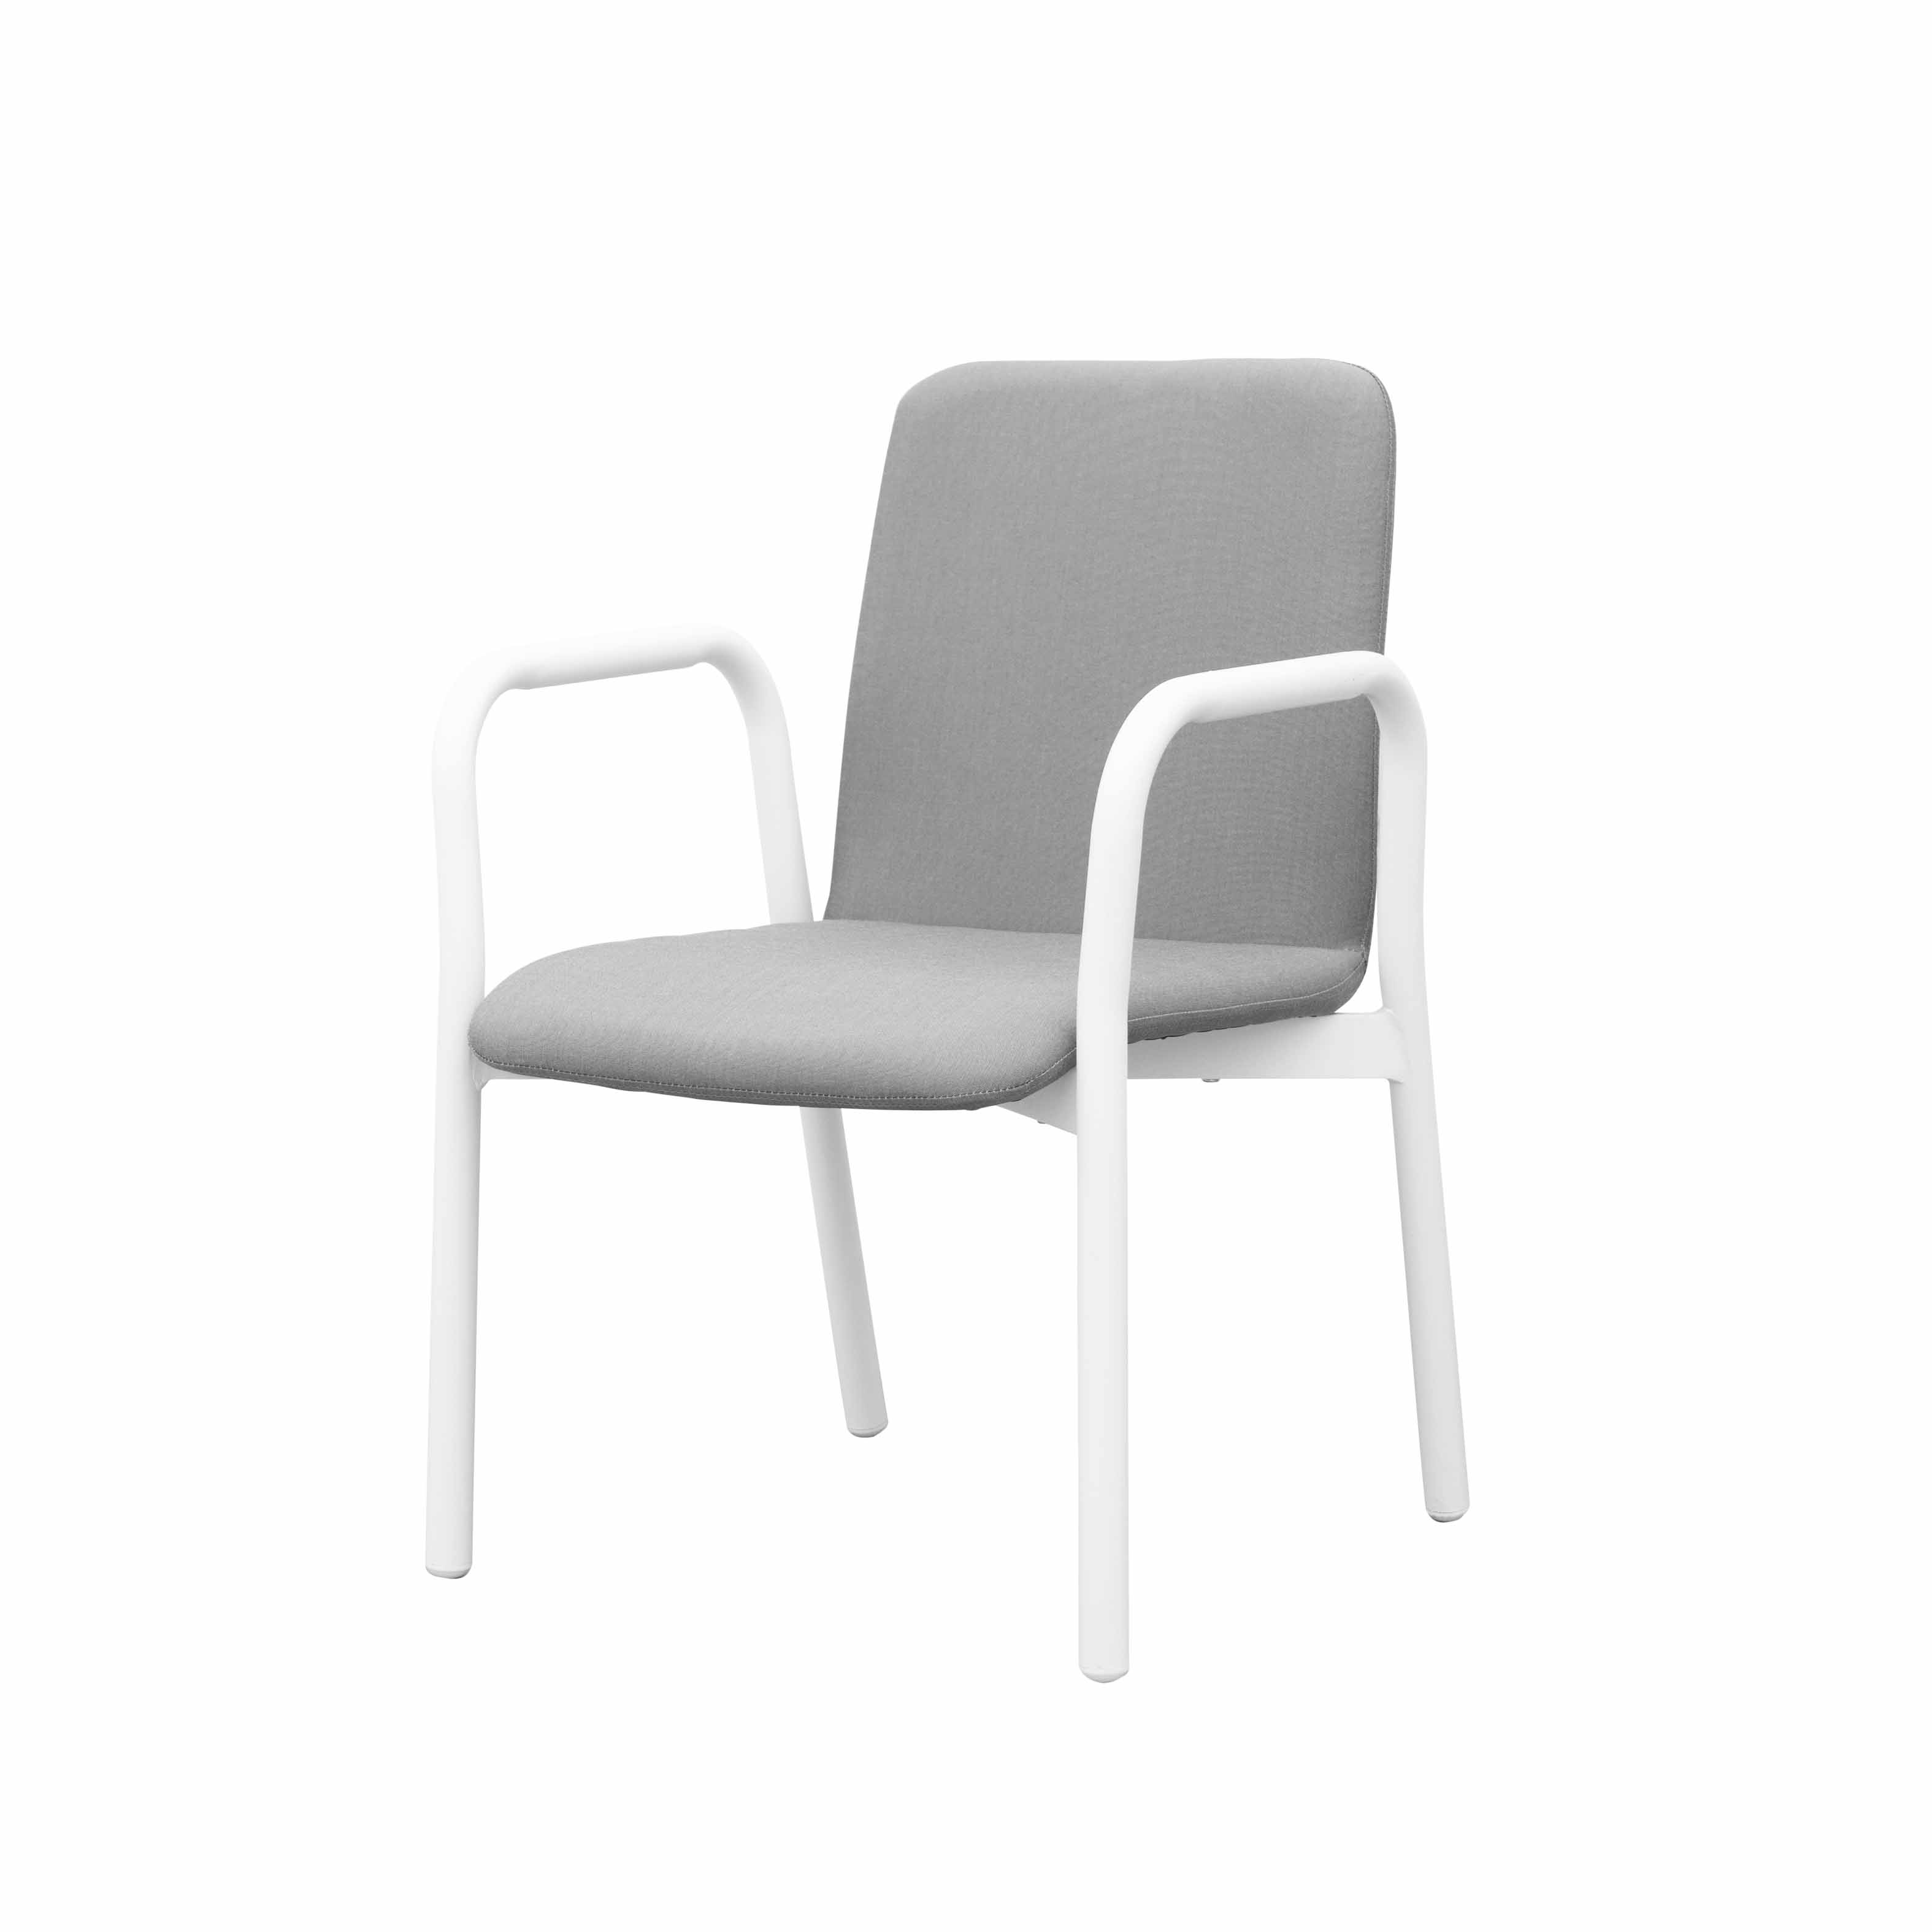 Houston fabric dining chair S1